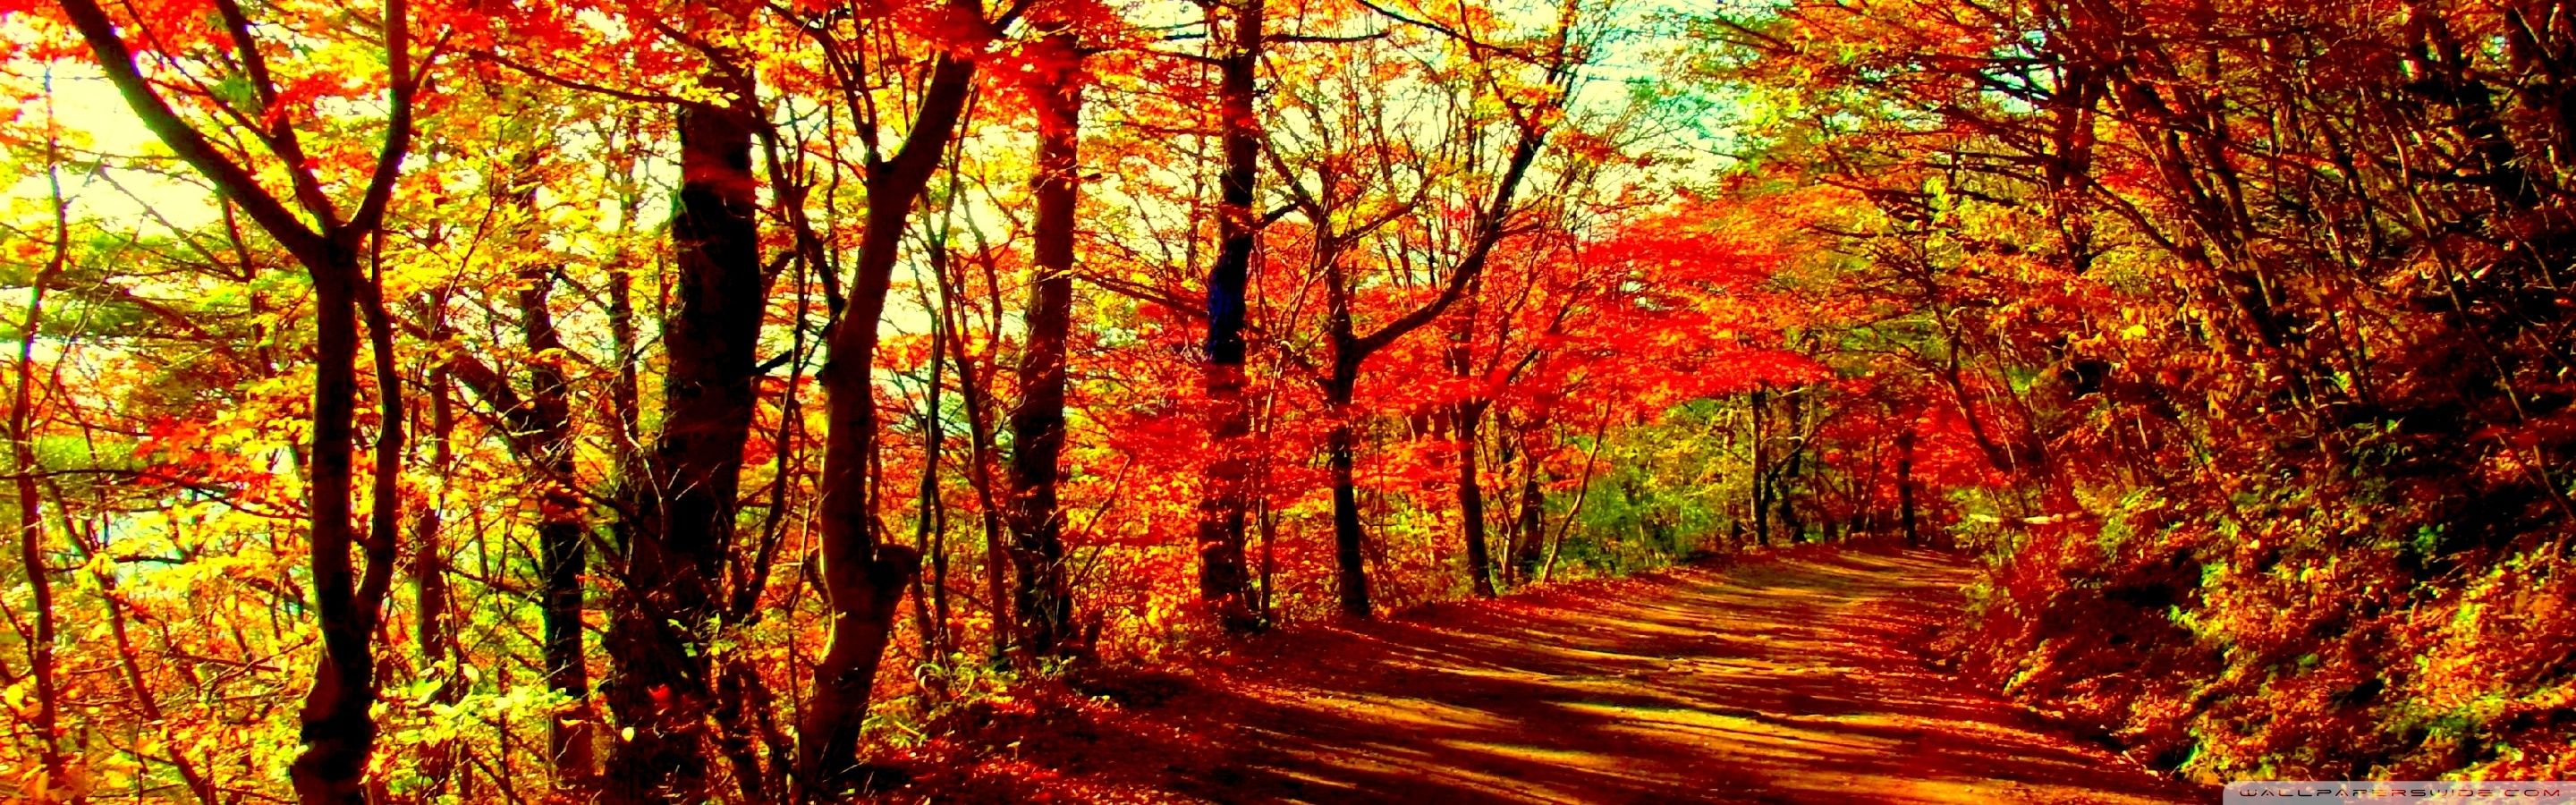 Autumn Forest Ultra HD Desktop Background Wallpaper for: Multi Display, Dual Monitor, Tablet